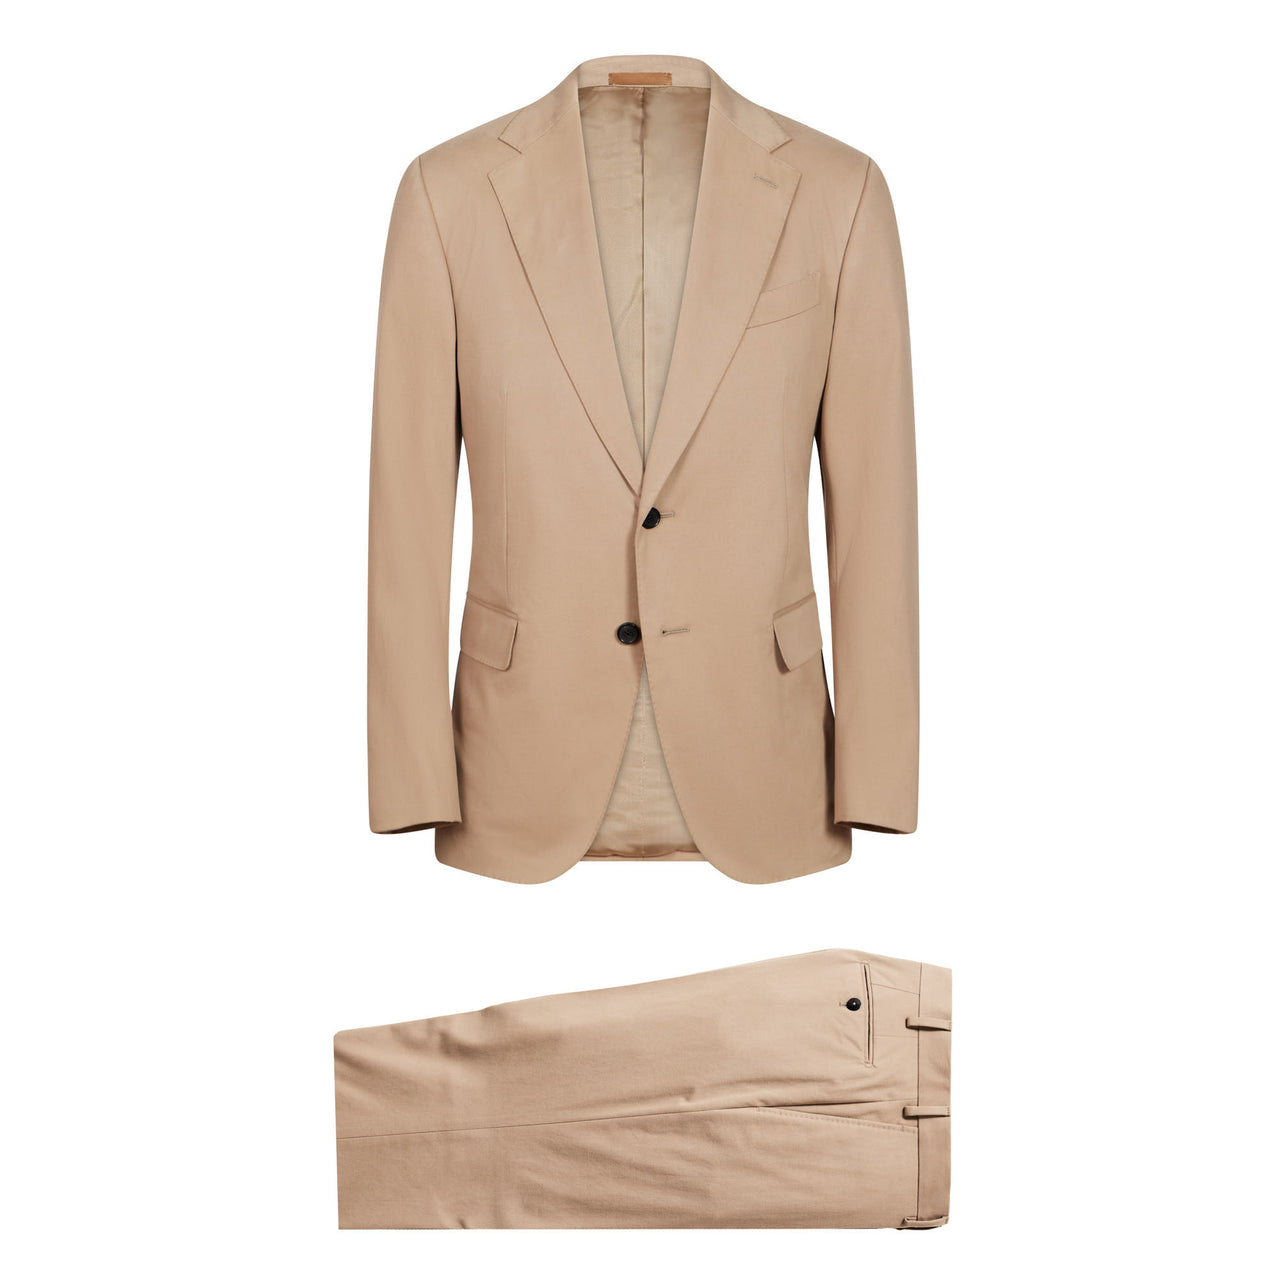 HENRY SARTORIAL X CARUSO Single Breasted 2 Button Norma Suit BEIGE REG